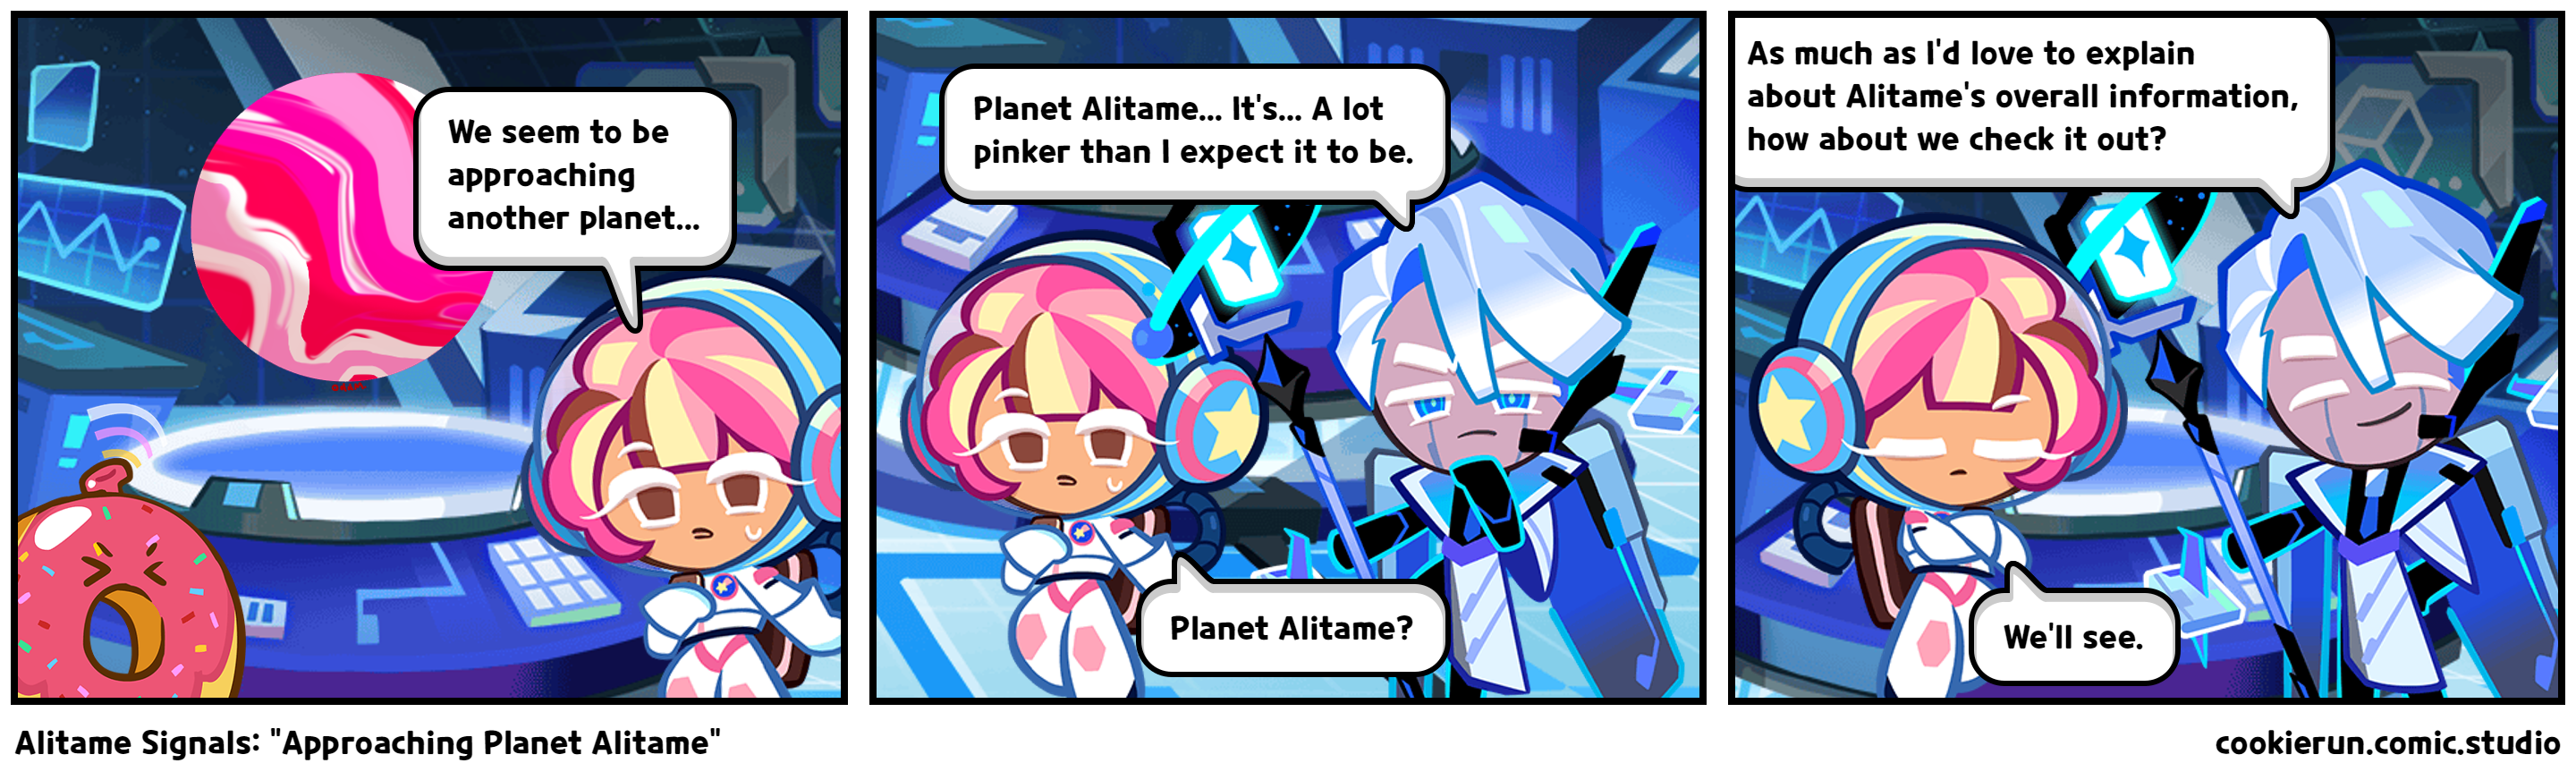 Alitame Signals: "Approaching Planet Alitame"